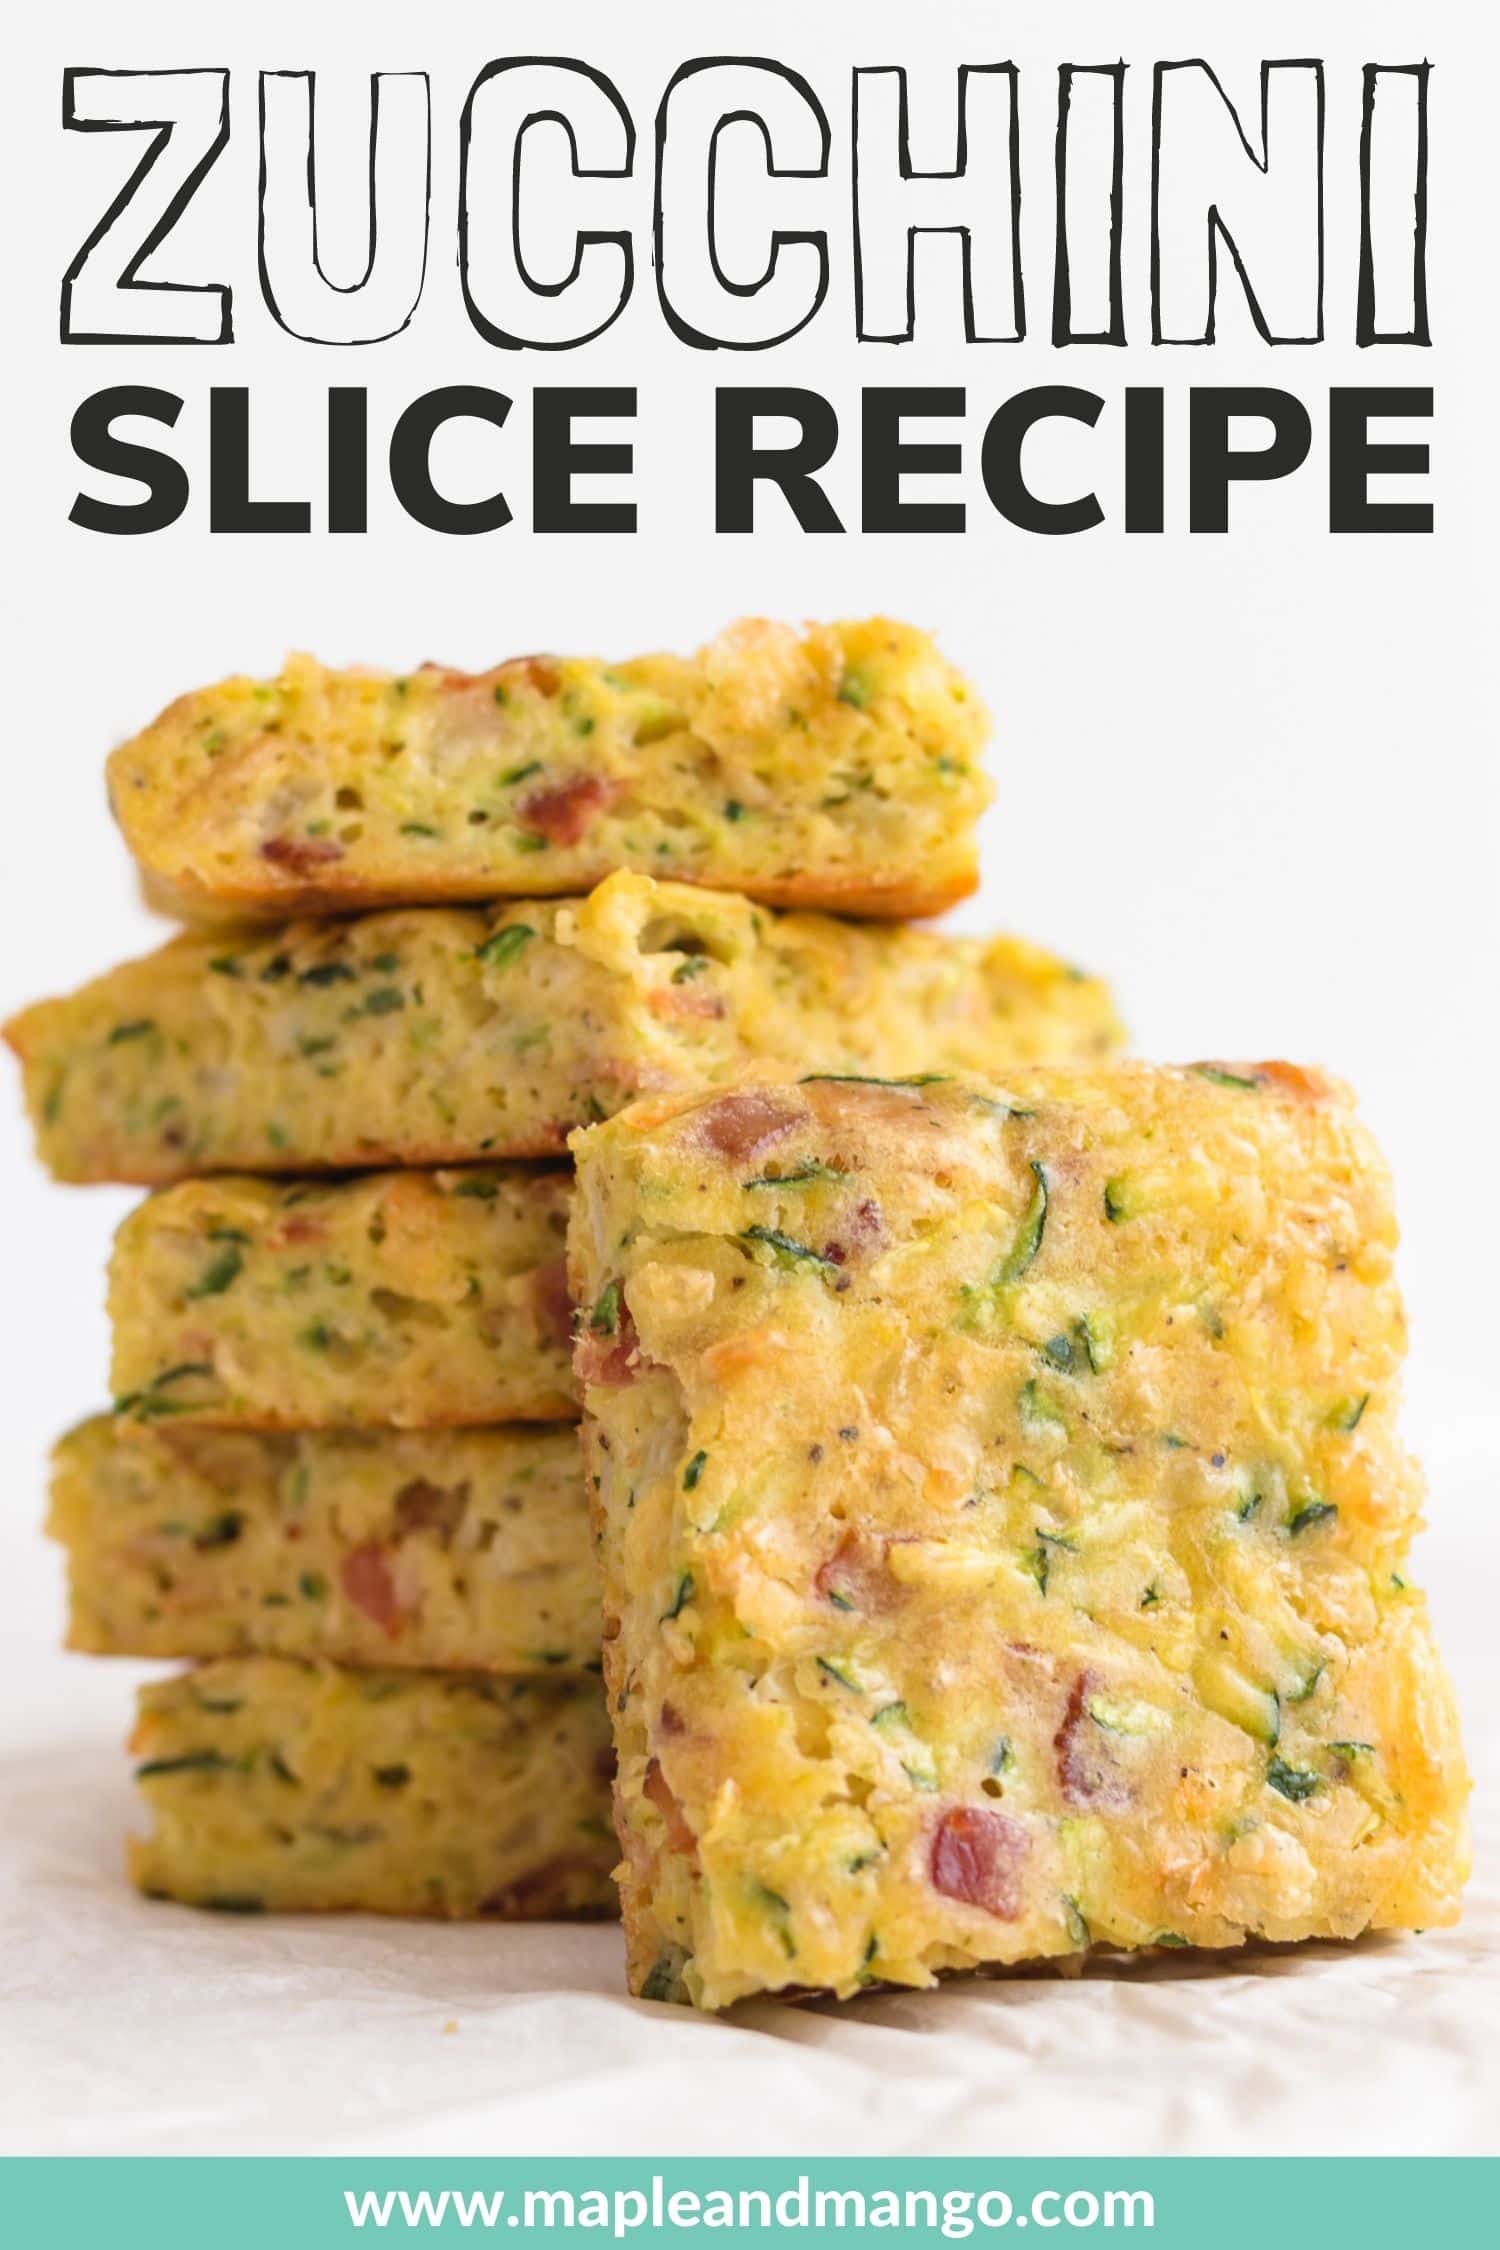 Graphic showing pile of zucchini slice with text overlay "Zucchini Slice Recipe".